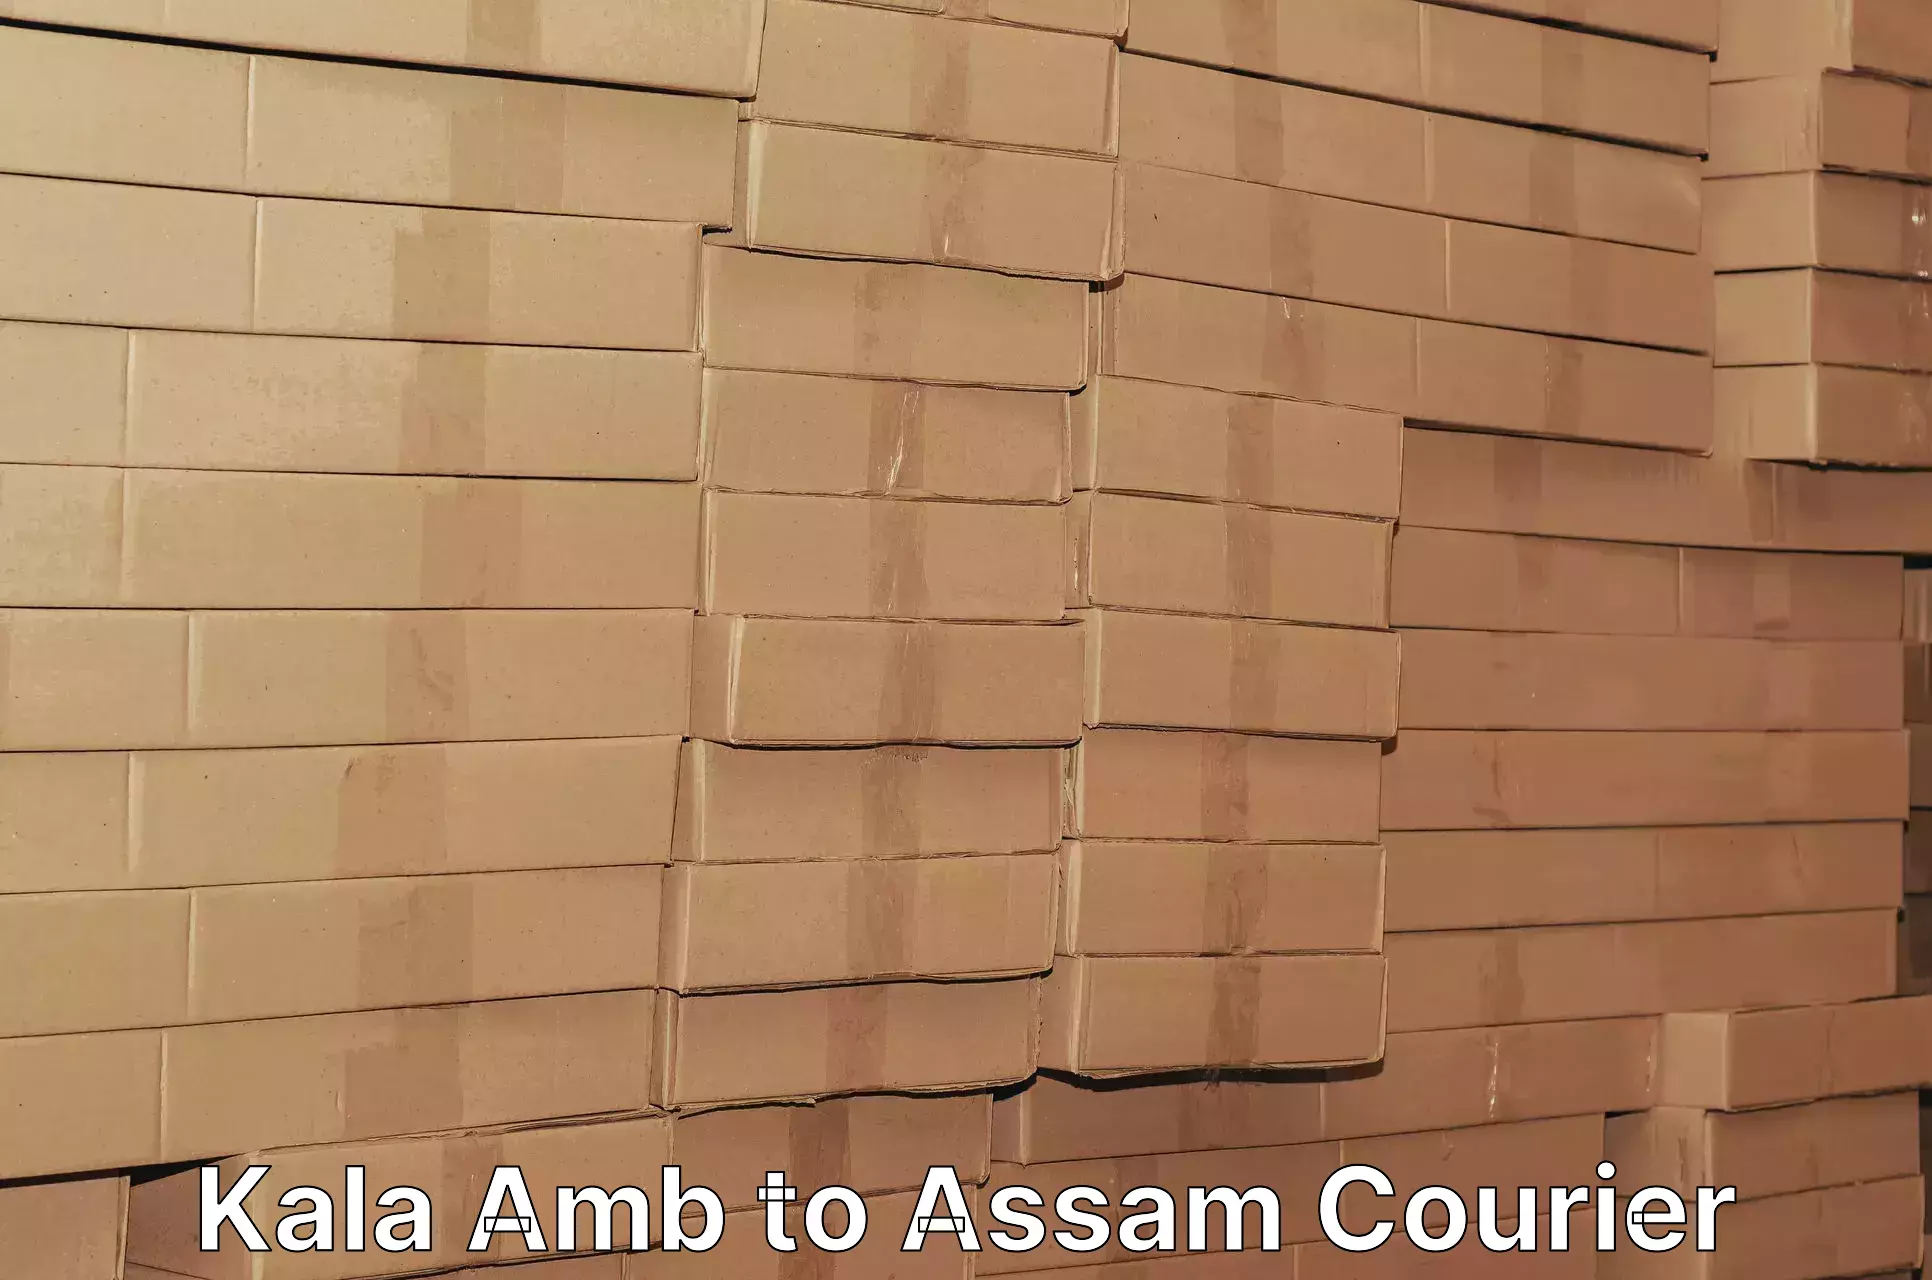 Local courier options in Kala Amb to Assam